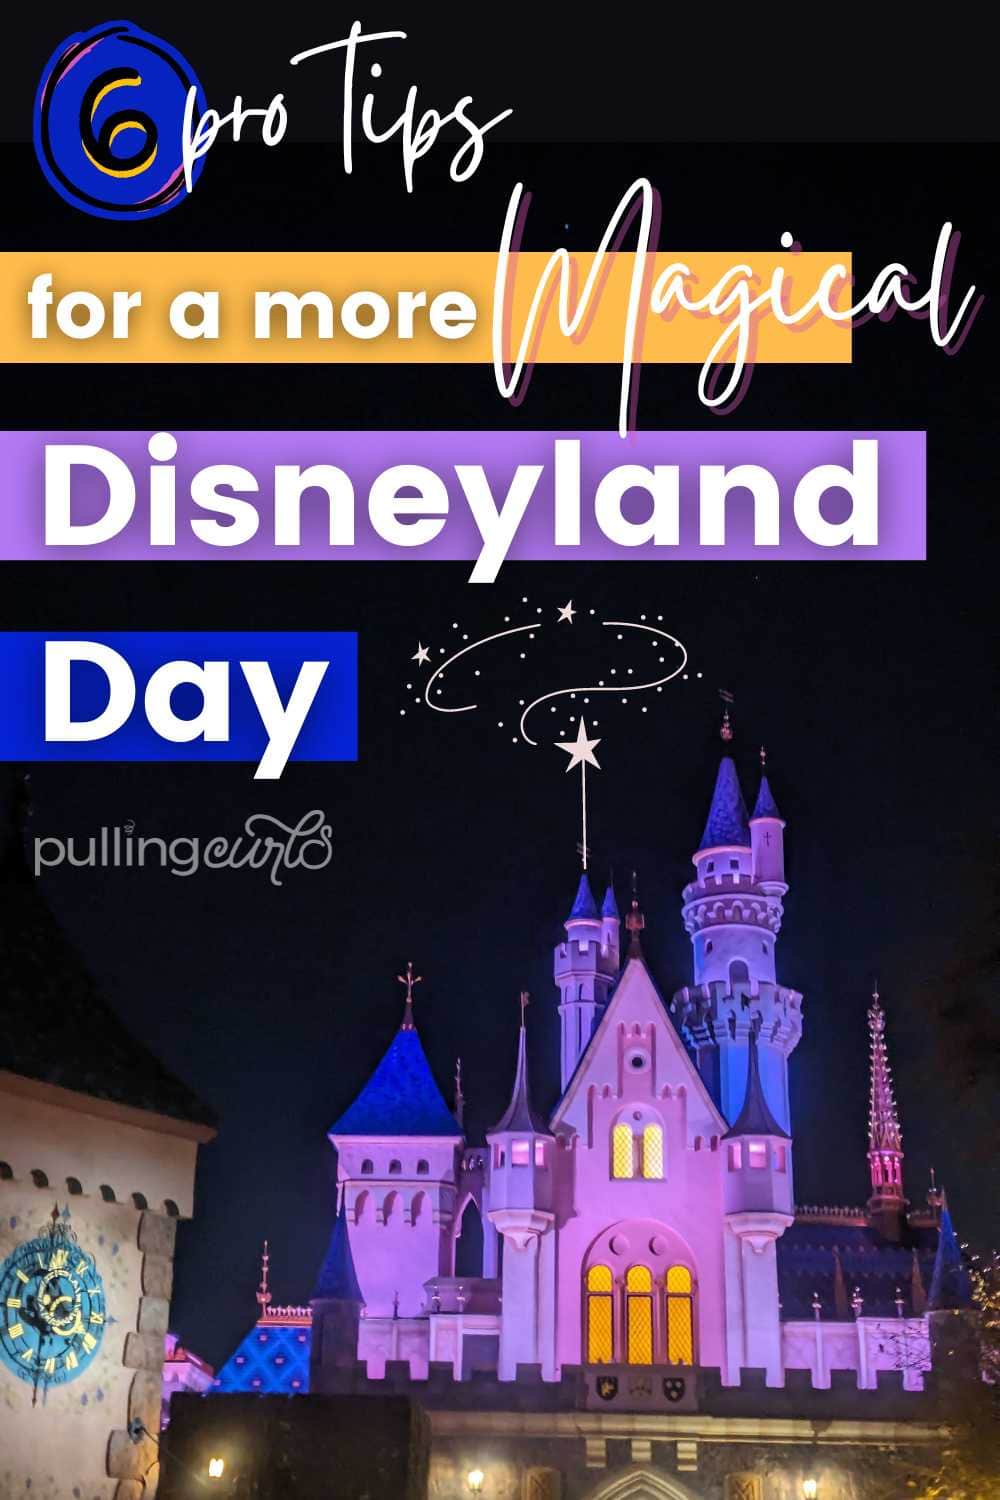 Tired of spending your Disneyland vacation in long lines and unprepared for the day? Check out our foolproof tips for a magical day at Disneyland Resort. From leveraging the power of the Lightening Lane to the best ways to fill your energy tank, we've got you covered! via @pullingcurls